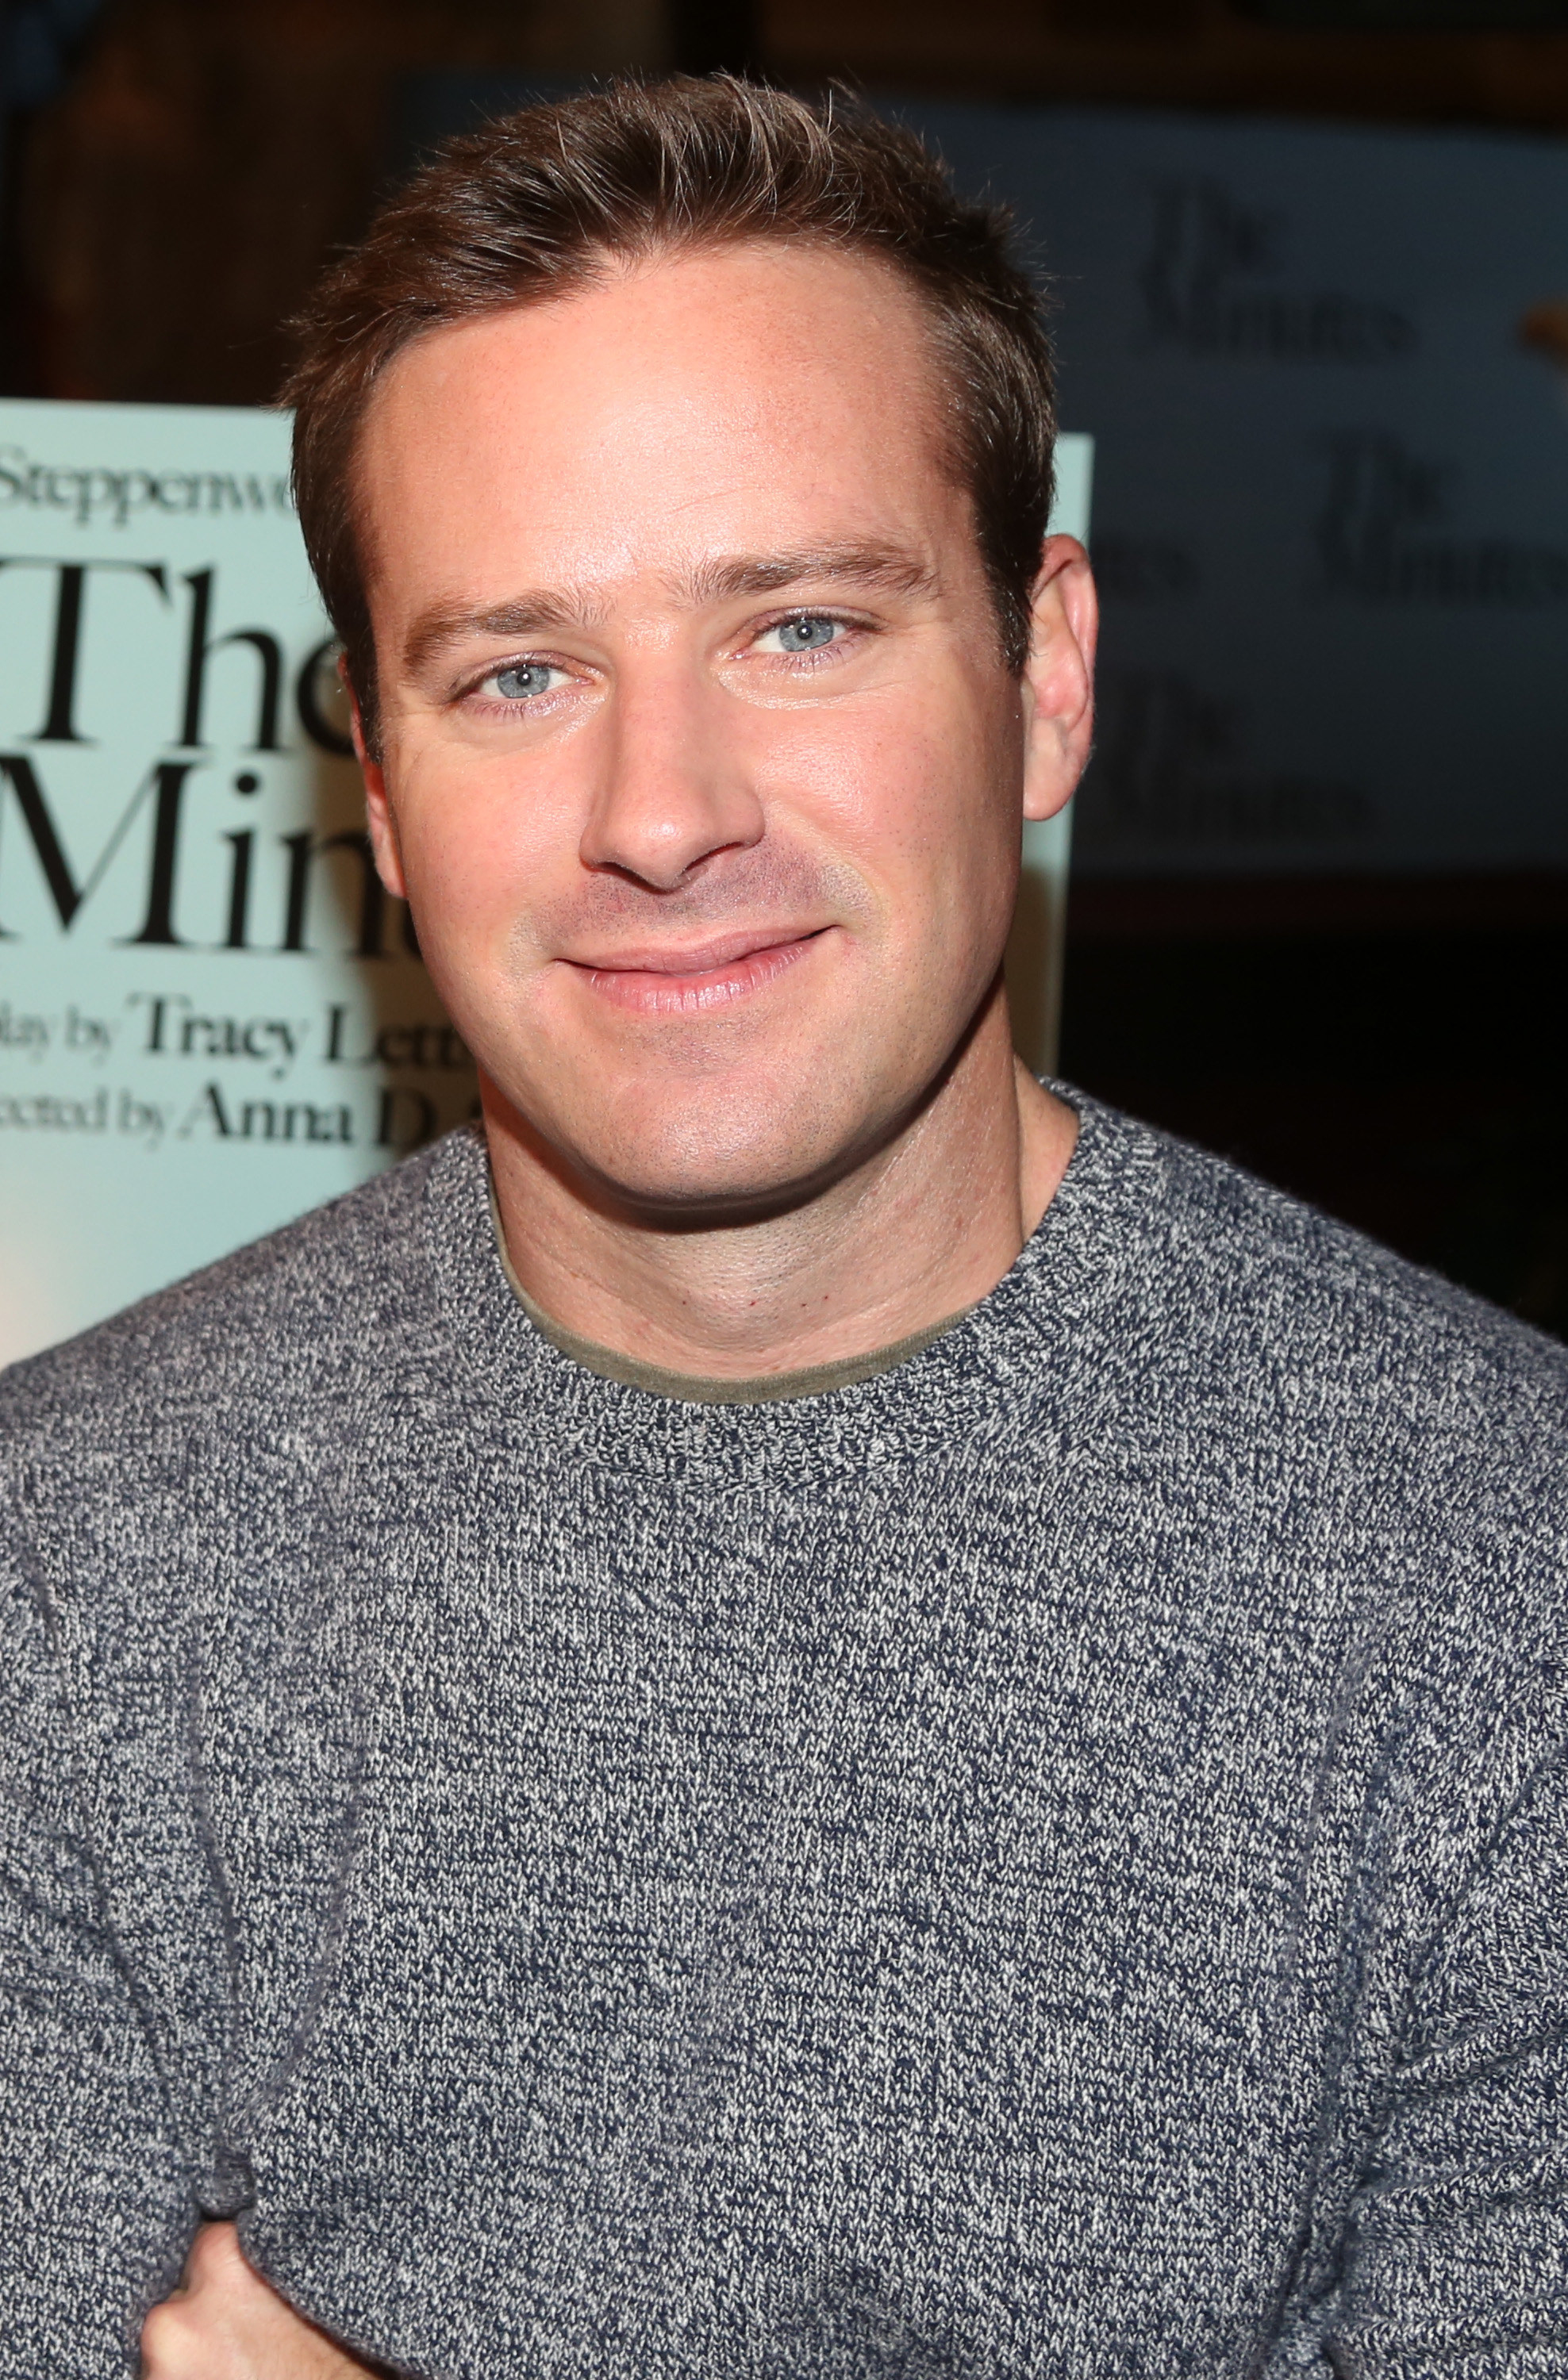 Hammer smiles while wearing a sweater at a press day for the play The Minutes